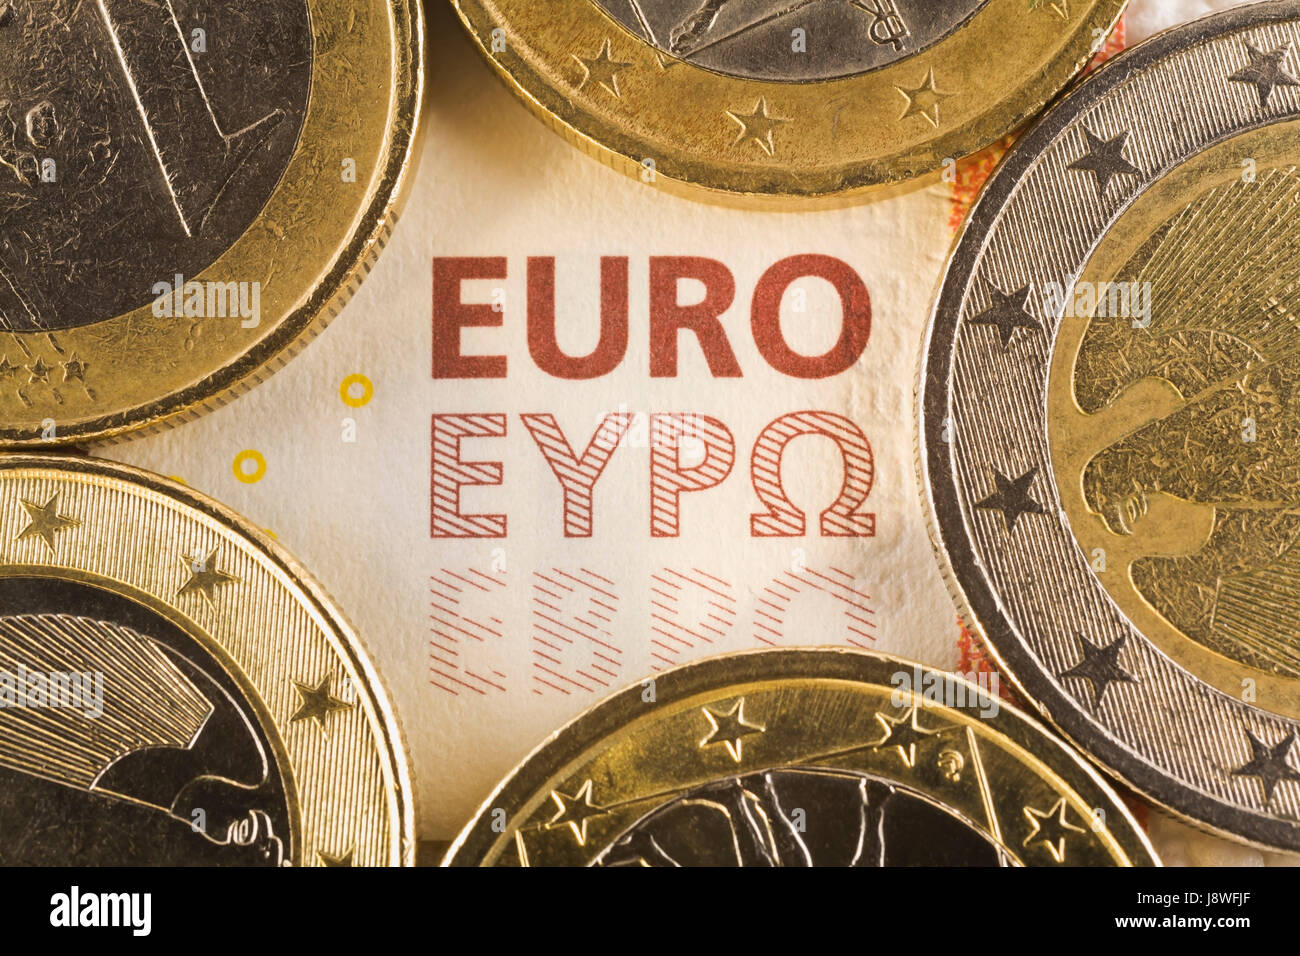 Euro coins on top of ten Euro paper currency bank note Stock Photo